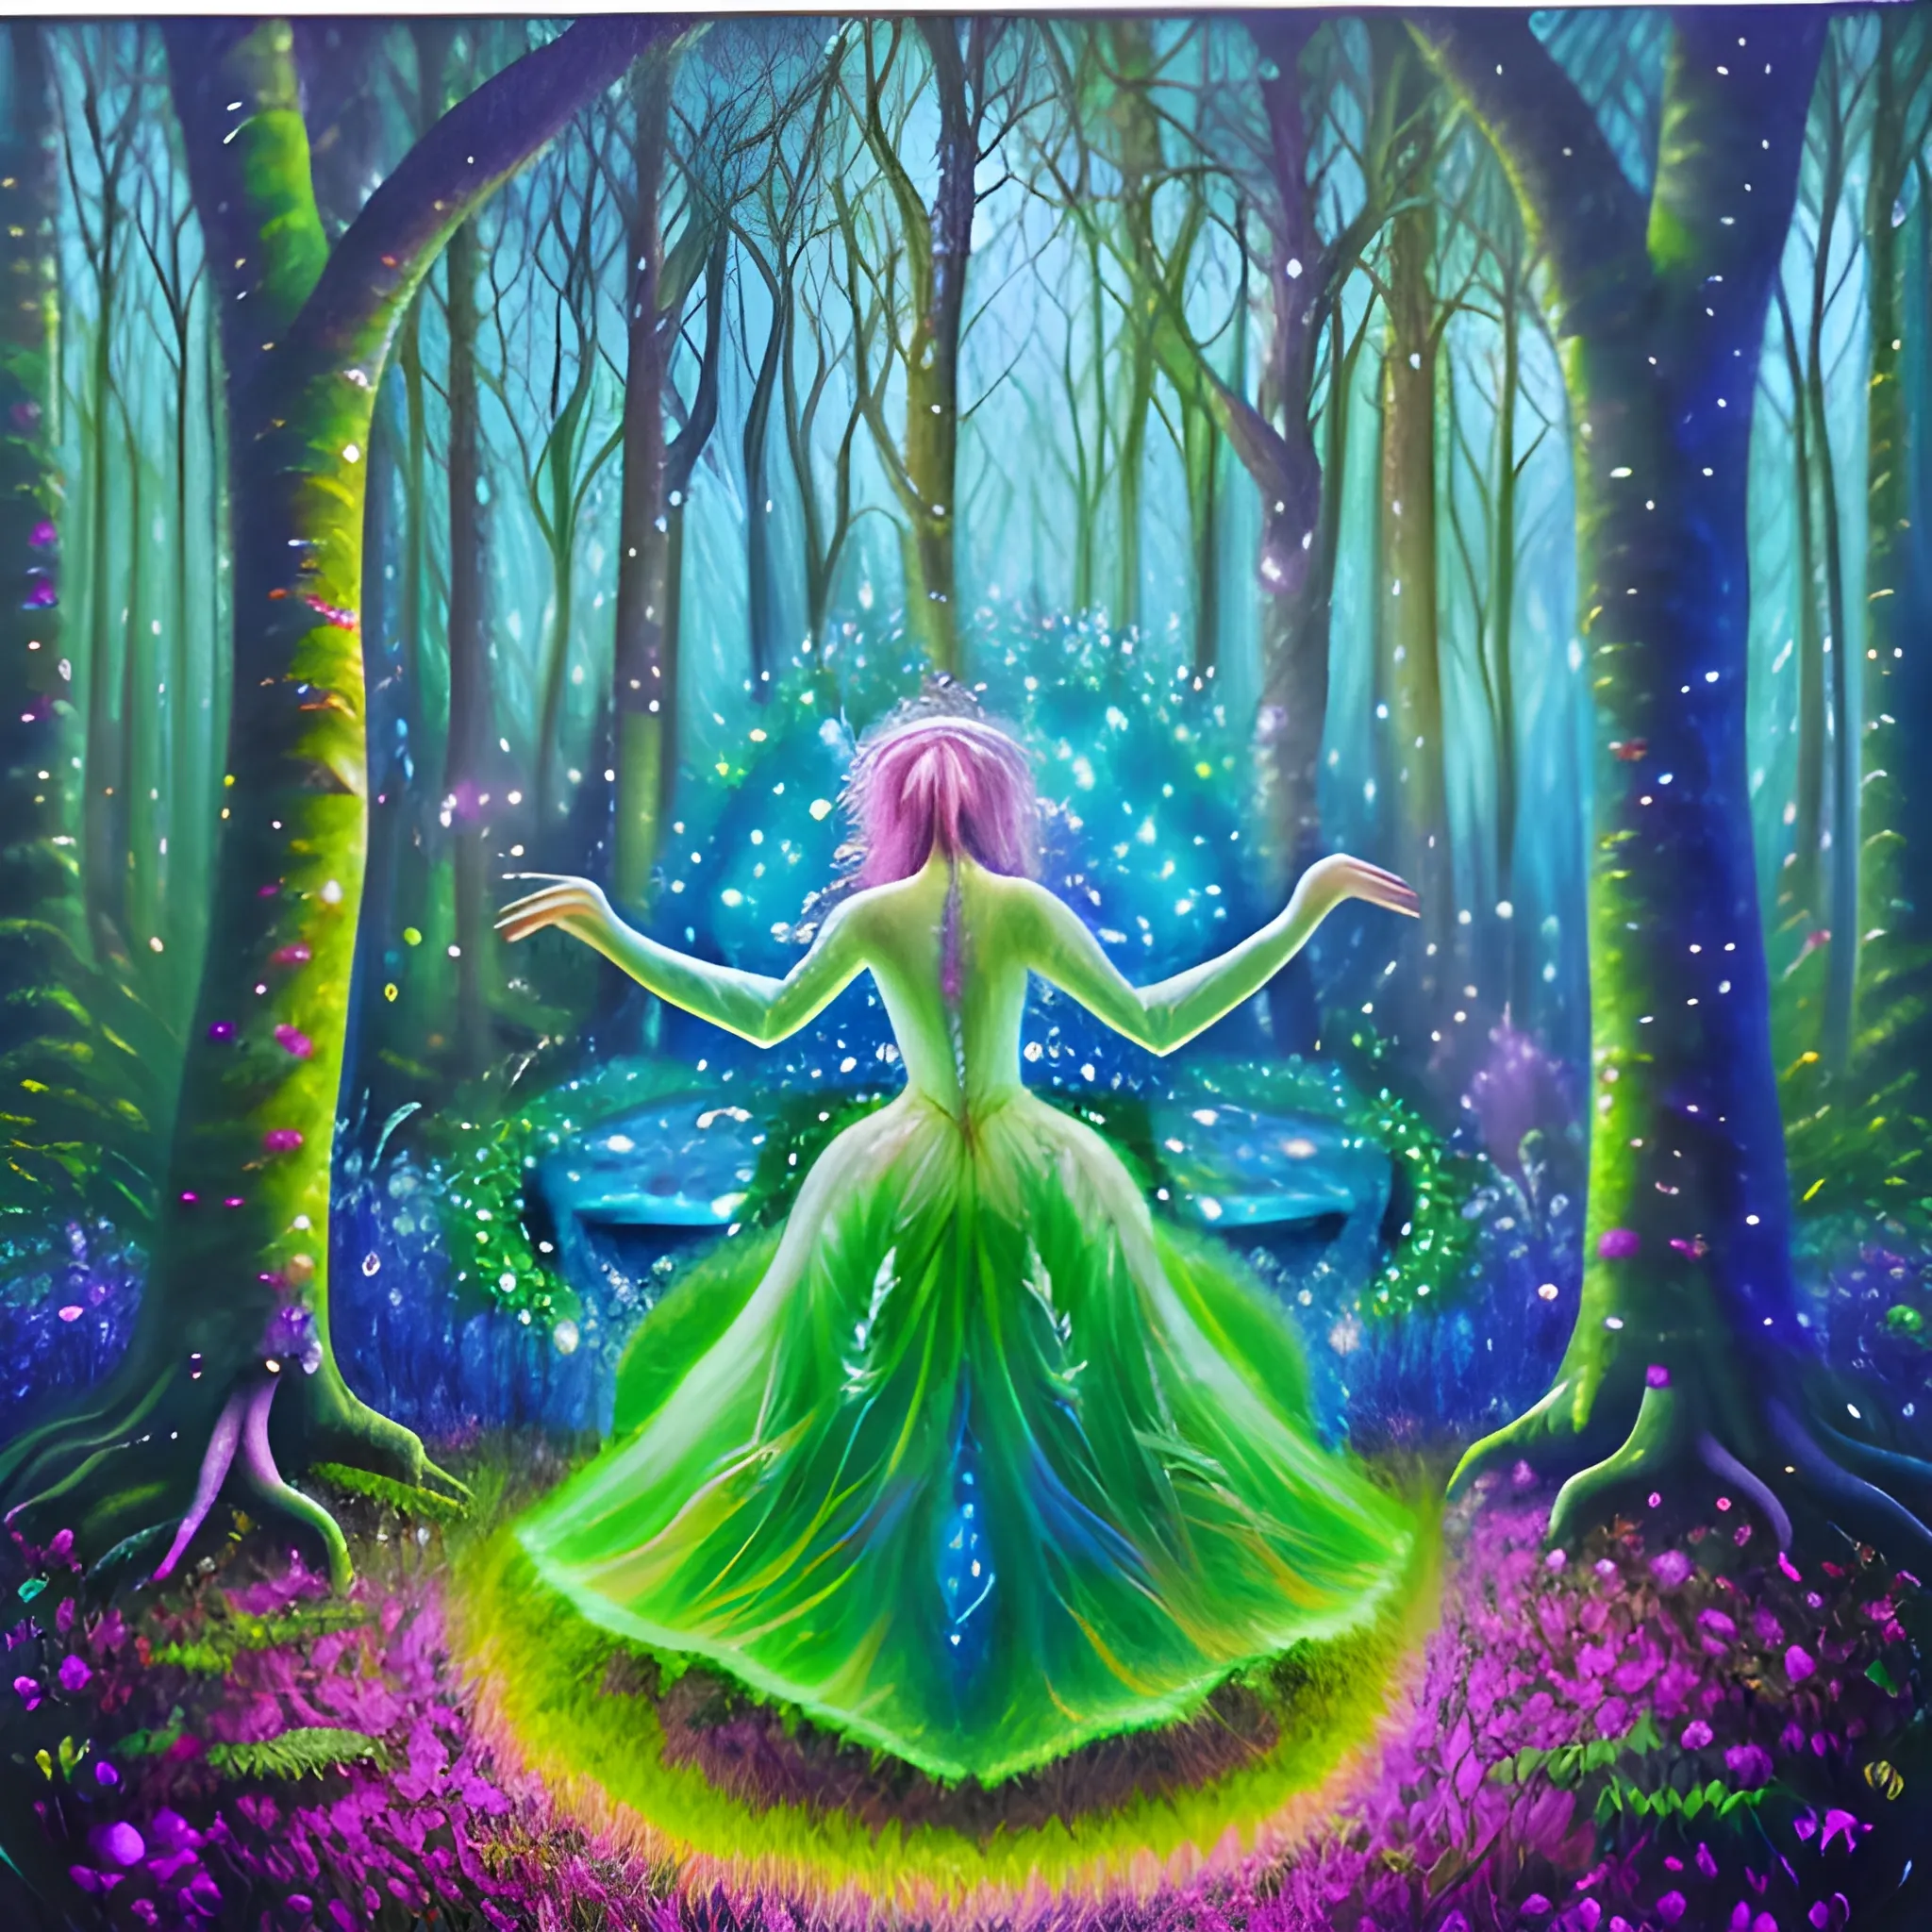 In the heart of the enchanted forest, the DJ conjures melodies that lure mythical creatures from hibernation. The drums' resounding pulse harmonizes with the whispers of trees, creating an otherworldly symphony. Lose yourself in nature's most mesmerizing dance., Oil Painting, Trippy, Water Color